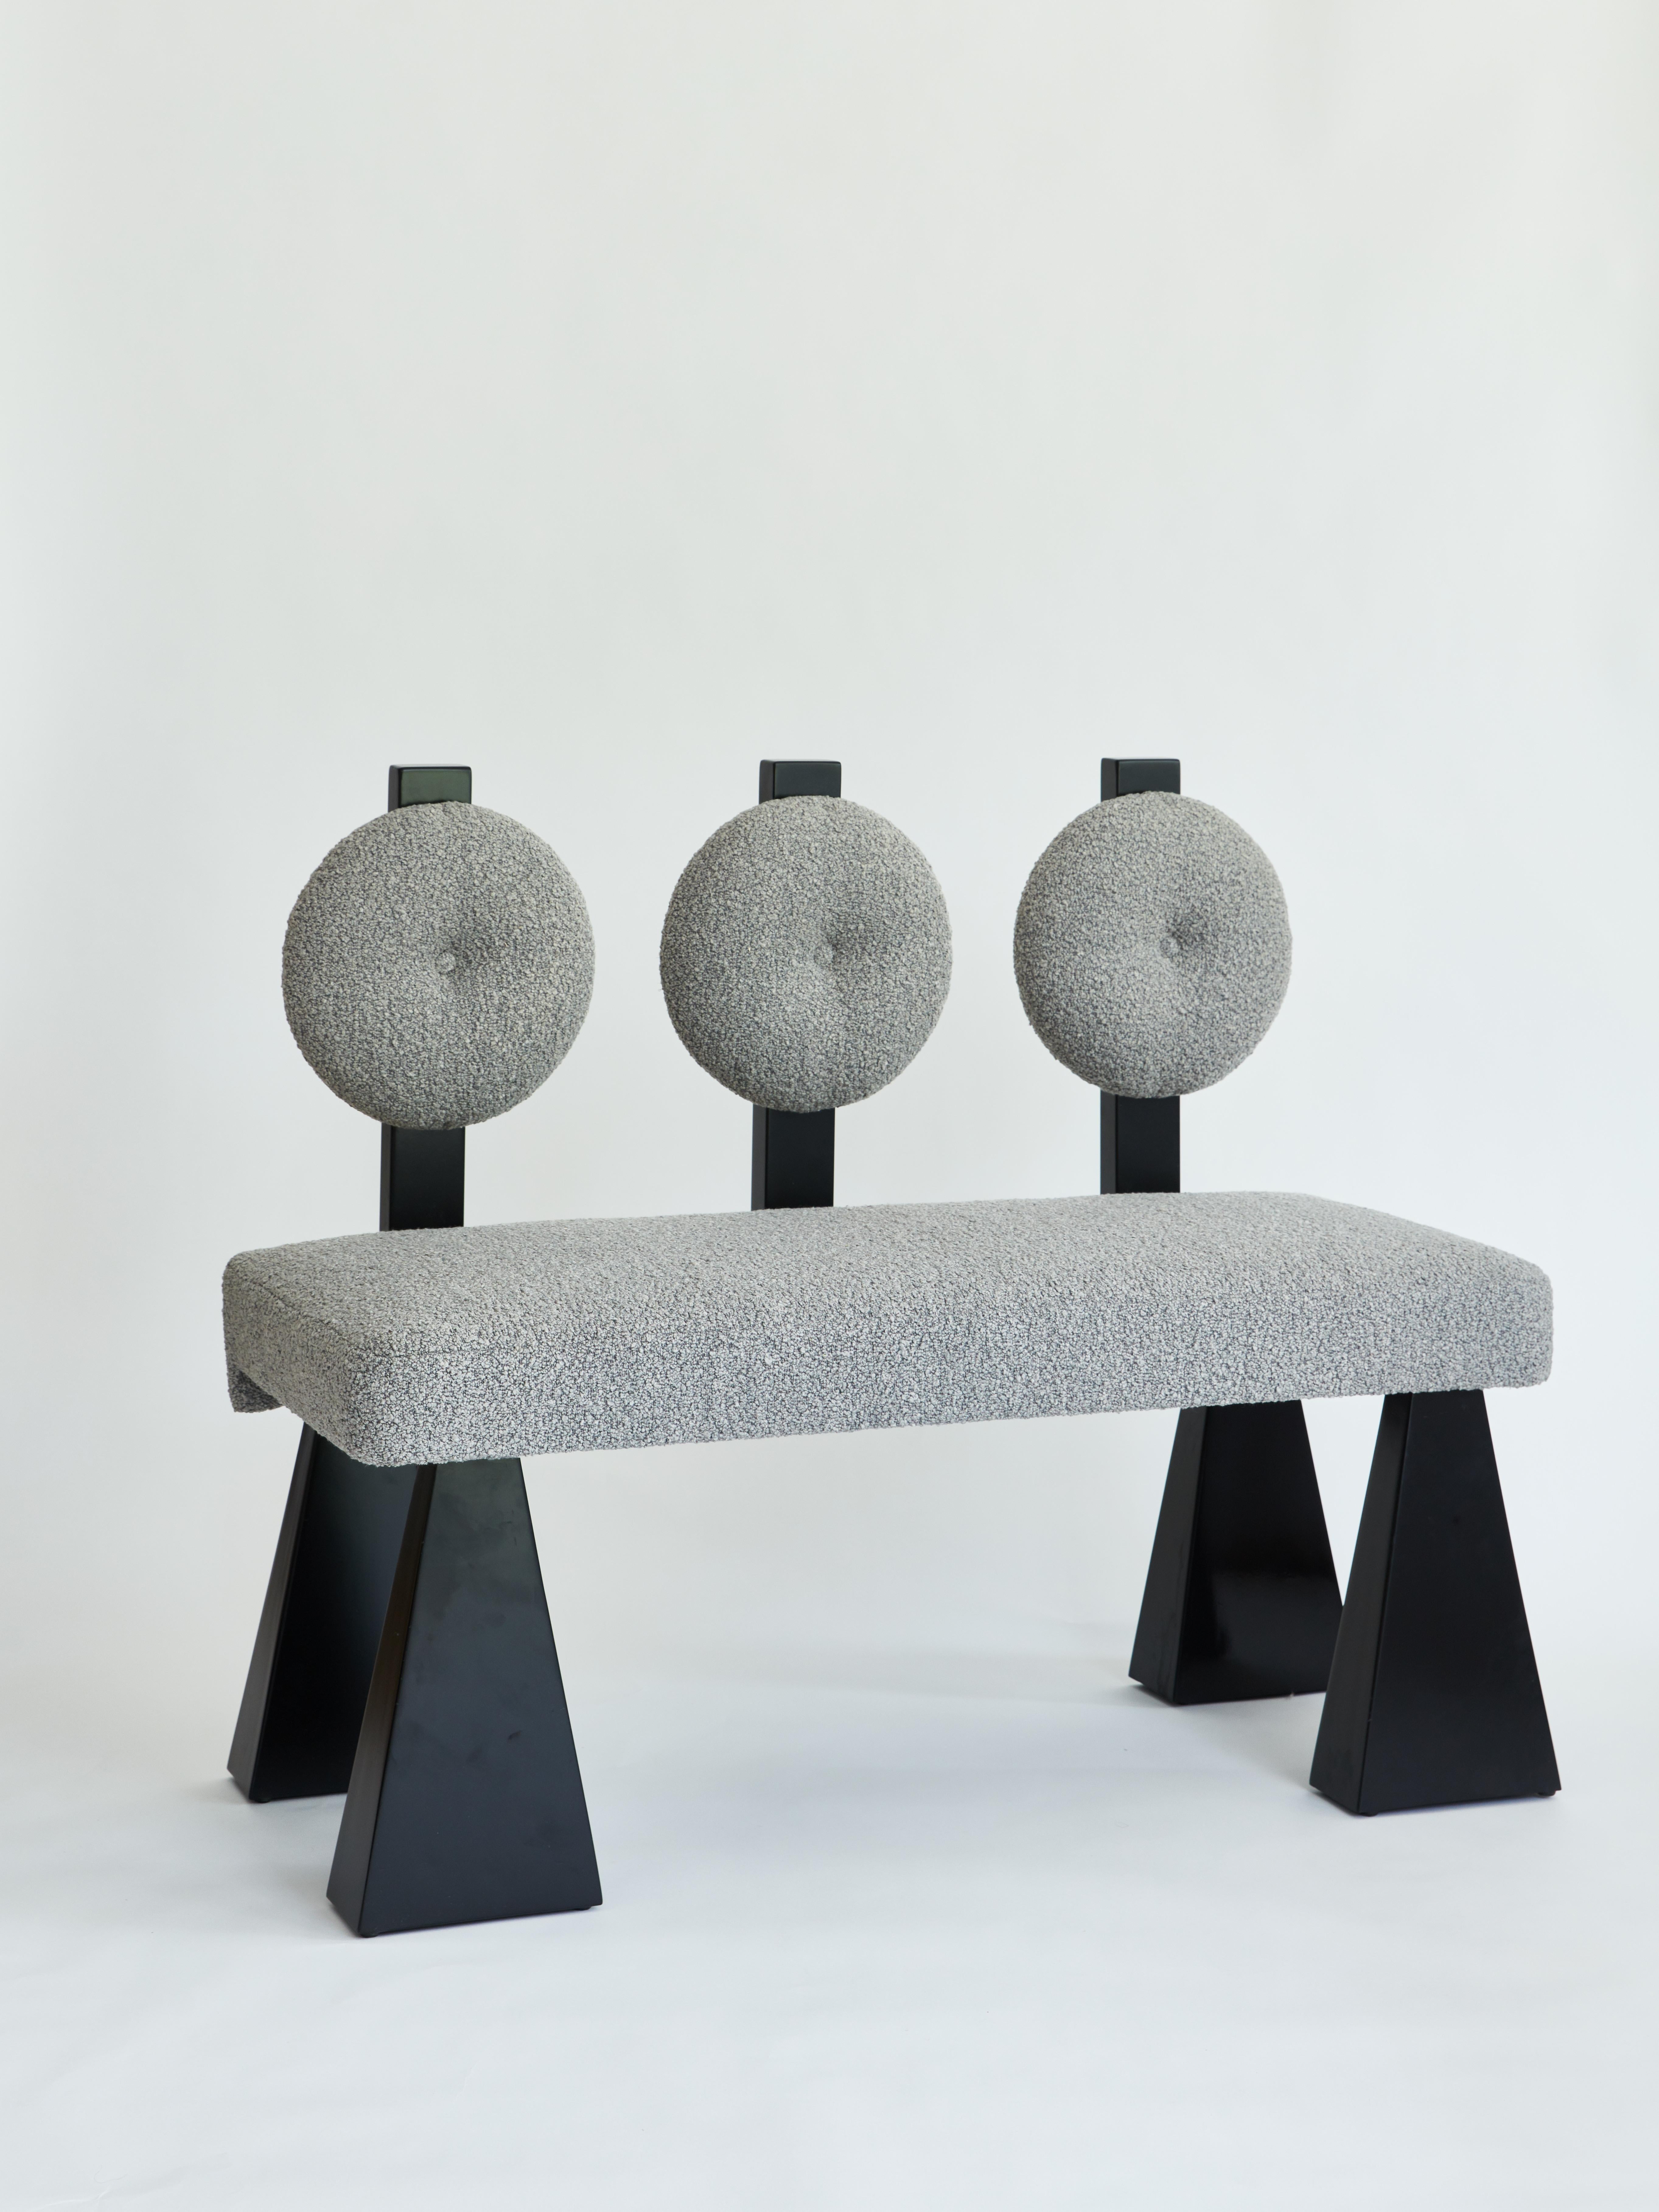 Made to order bouclé and wood settee designed by Christian Siriano.

Fabric for seat/back cushion:
Gray Bouclé

Base: Black lacquered maple

Also available in natural maple and ivory bouclé.